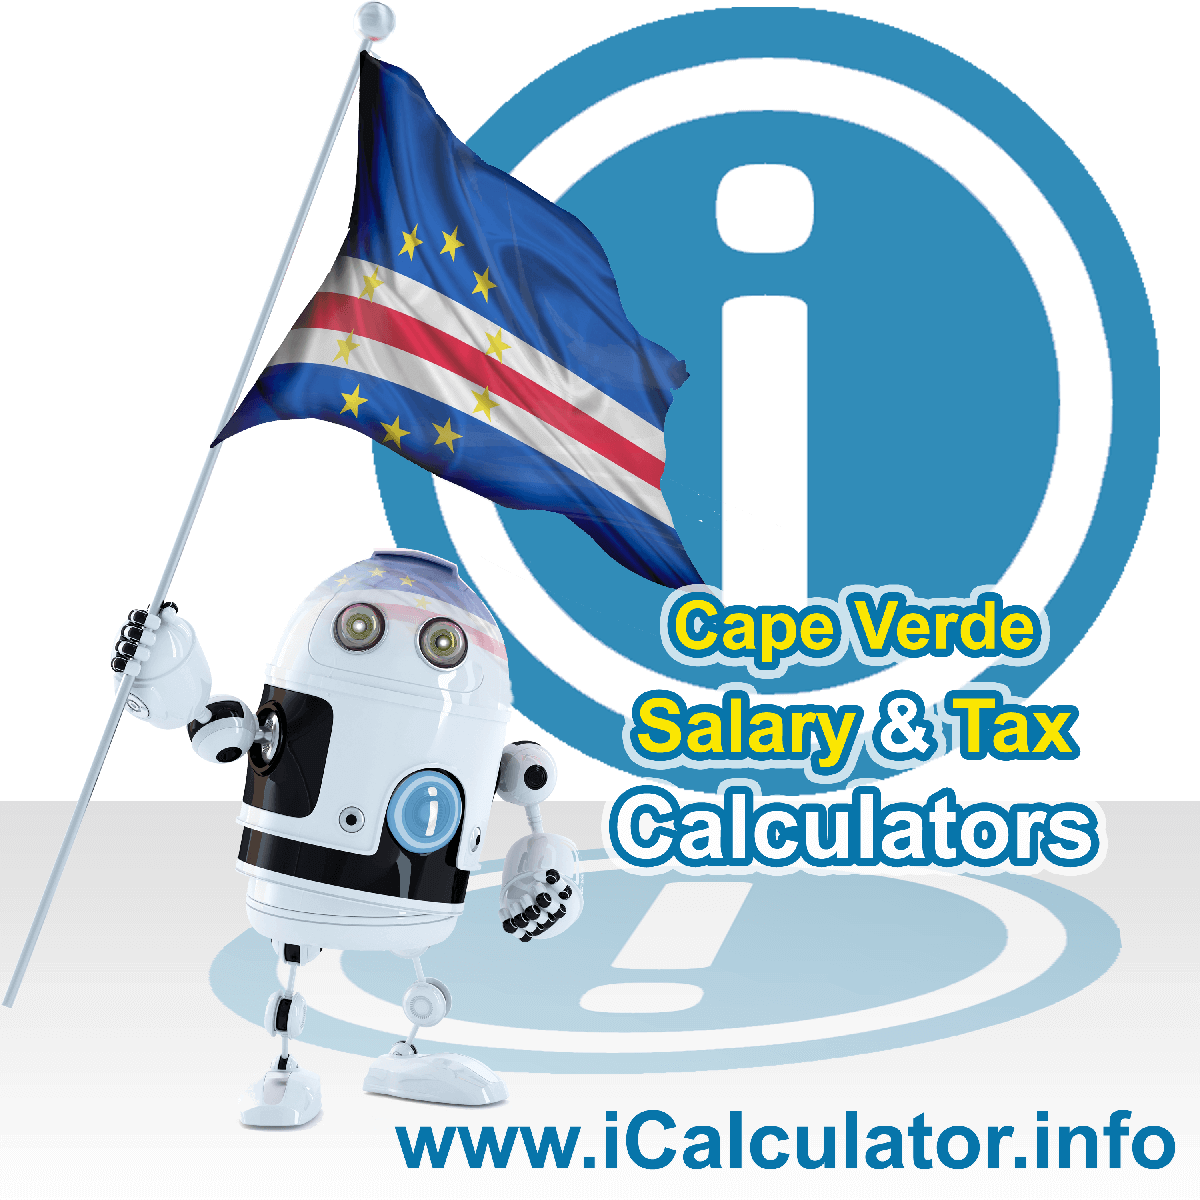 Cape Verde Tax Calculator. This image shows the Cape Verde flag and information relating to the tax formula for the Cape Verde Salary Calculator